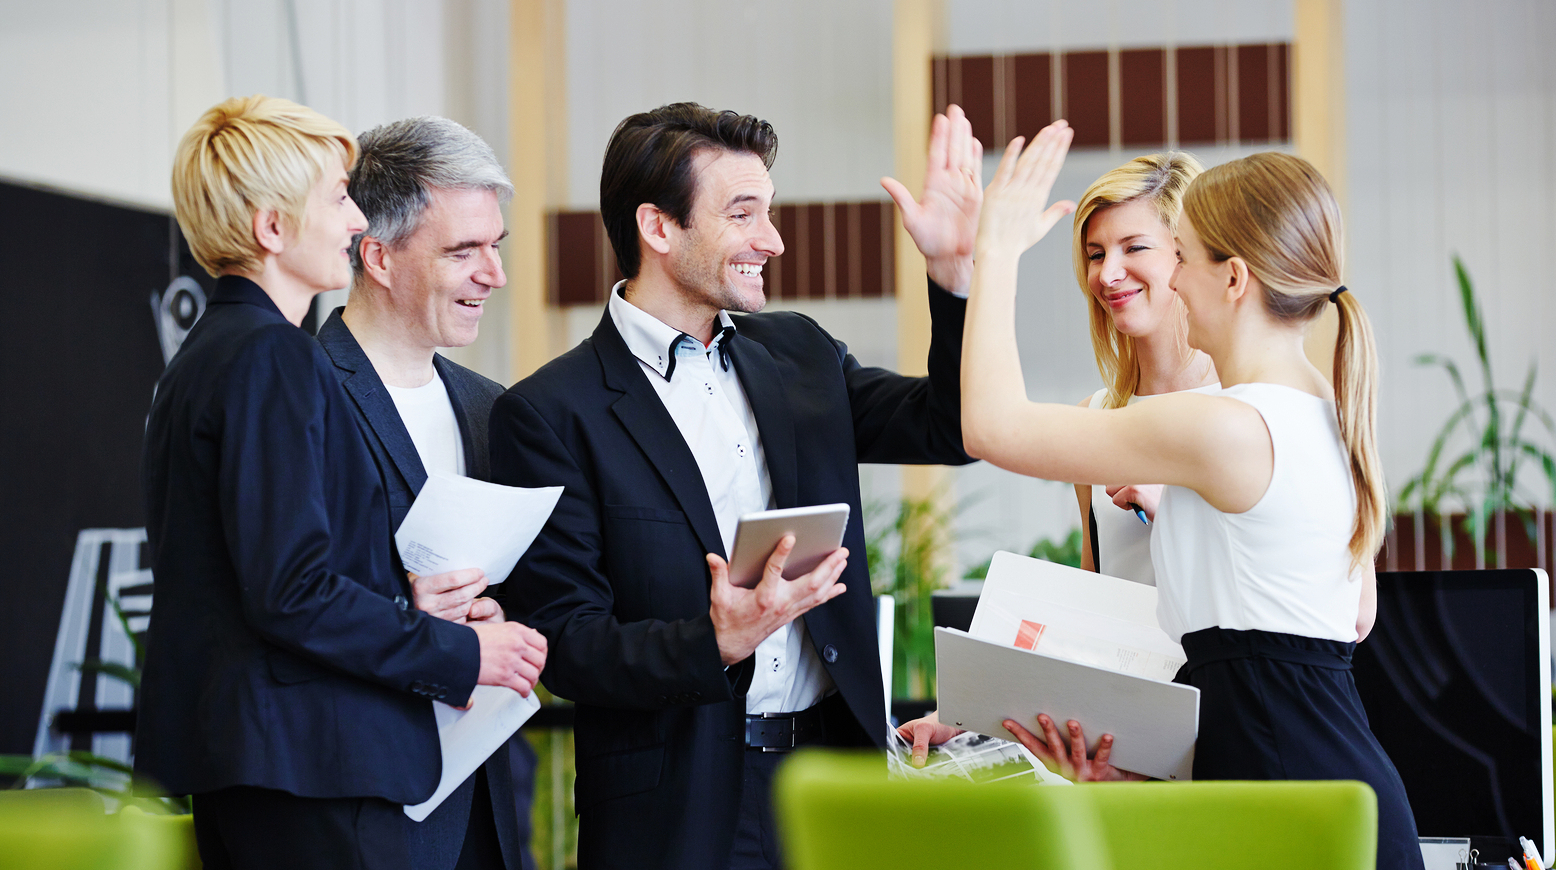 Successful team of business people giving high five in the office